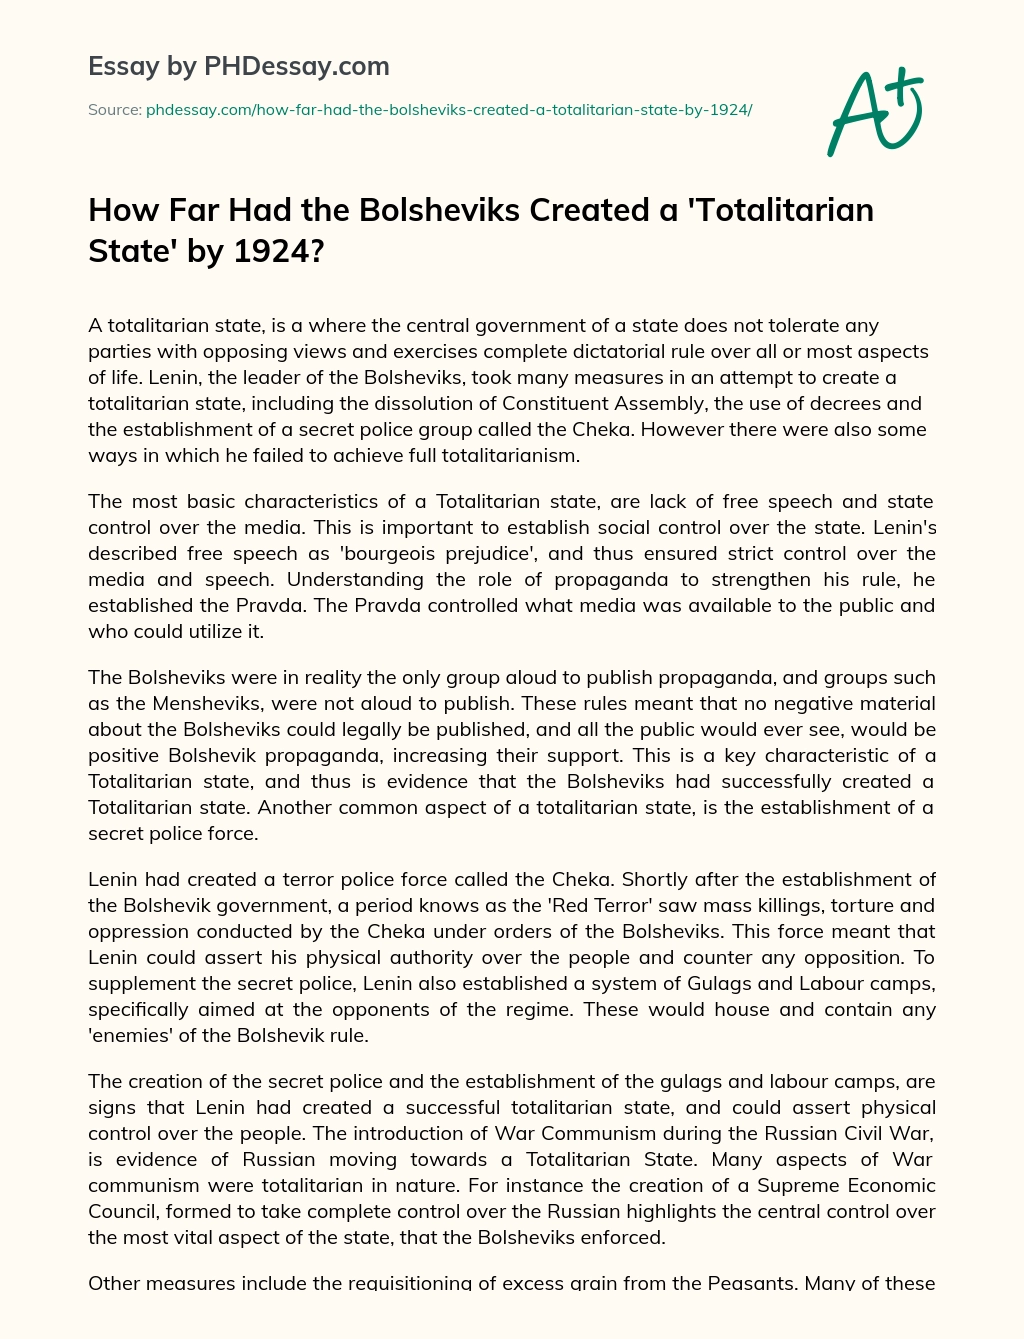 How Far Had the Bolsheviks Created a ‘Totalitarian State’ by 1924? essay